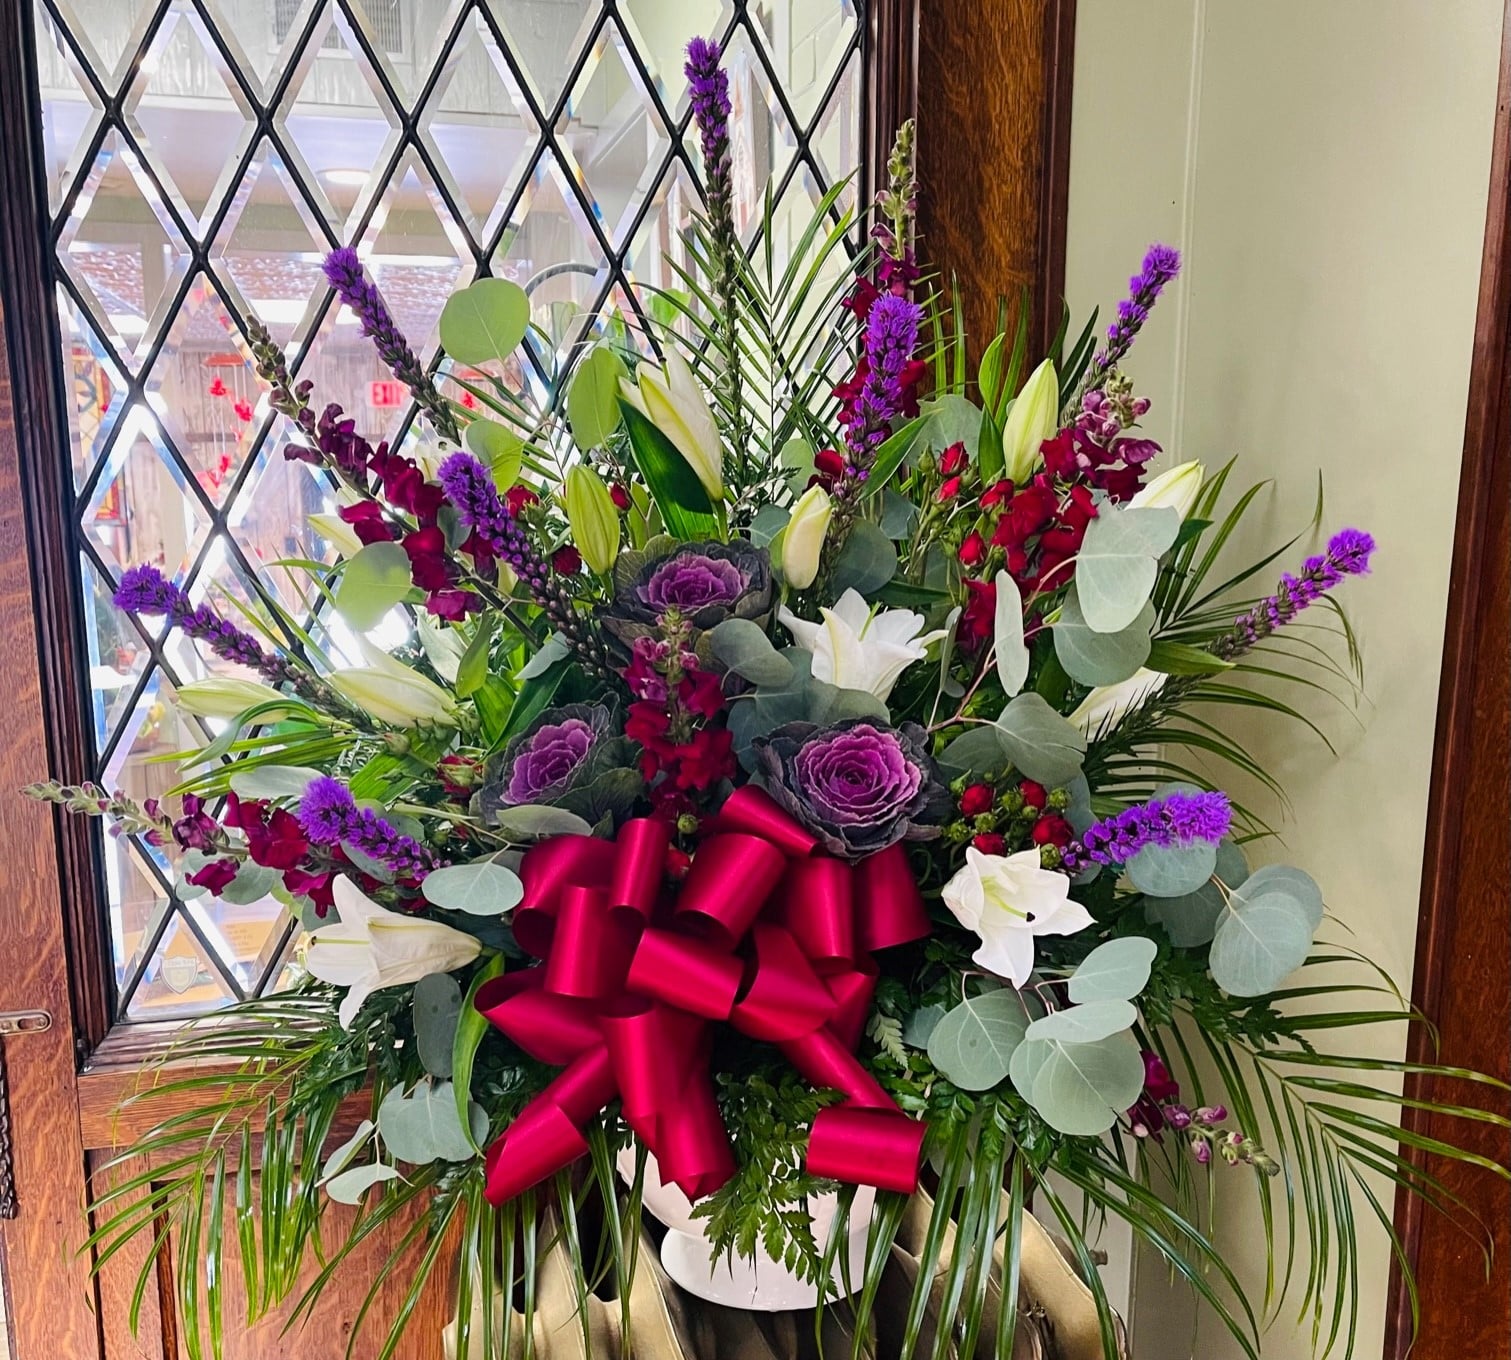 Bouquet of a purple, red, and white floral arrangement.